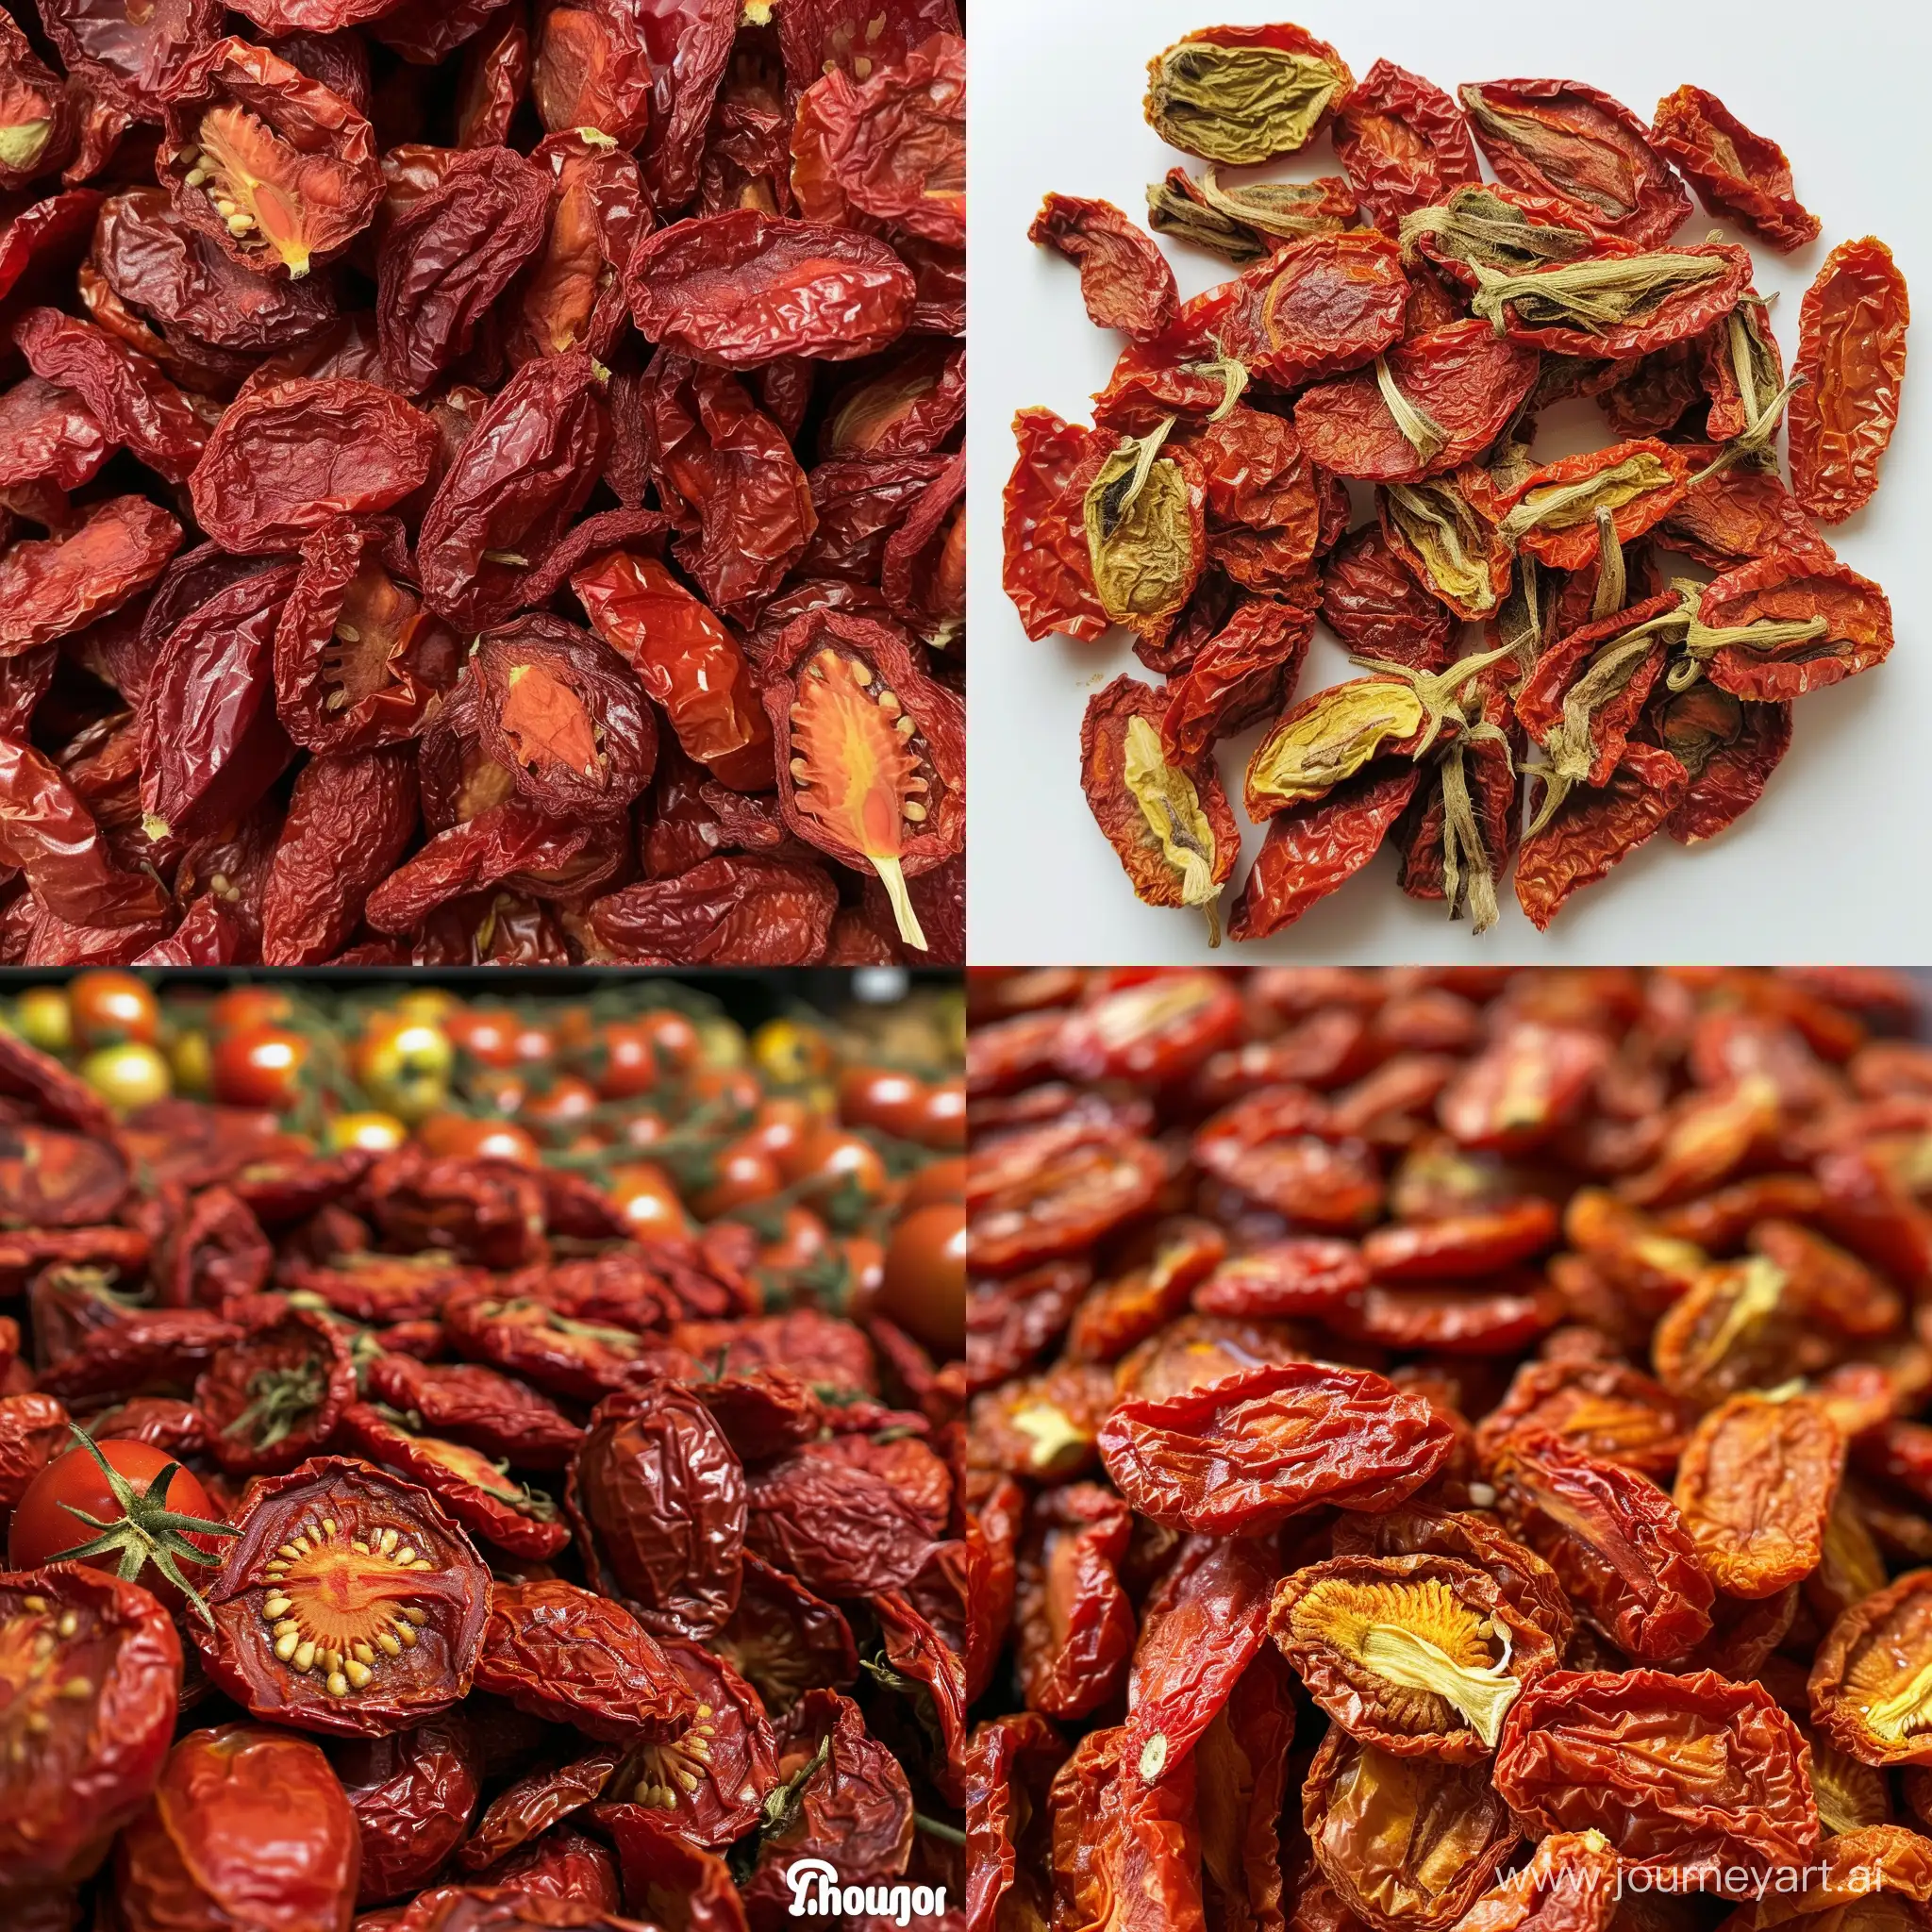 Actual photo of amount of dried tomatoes